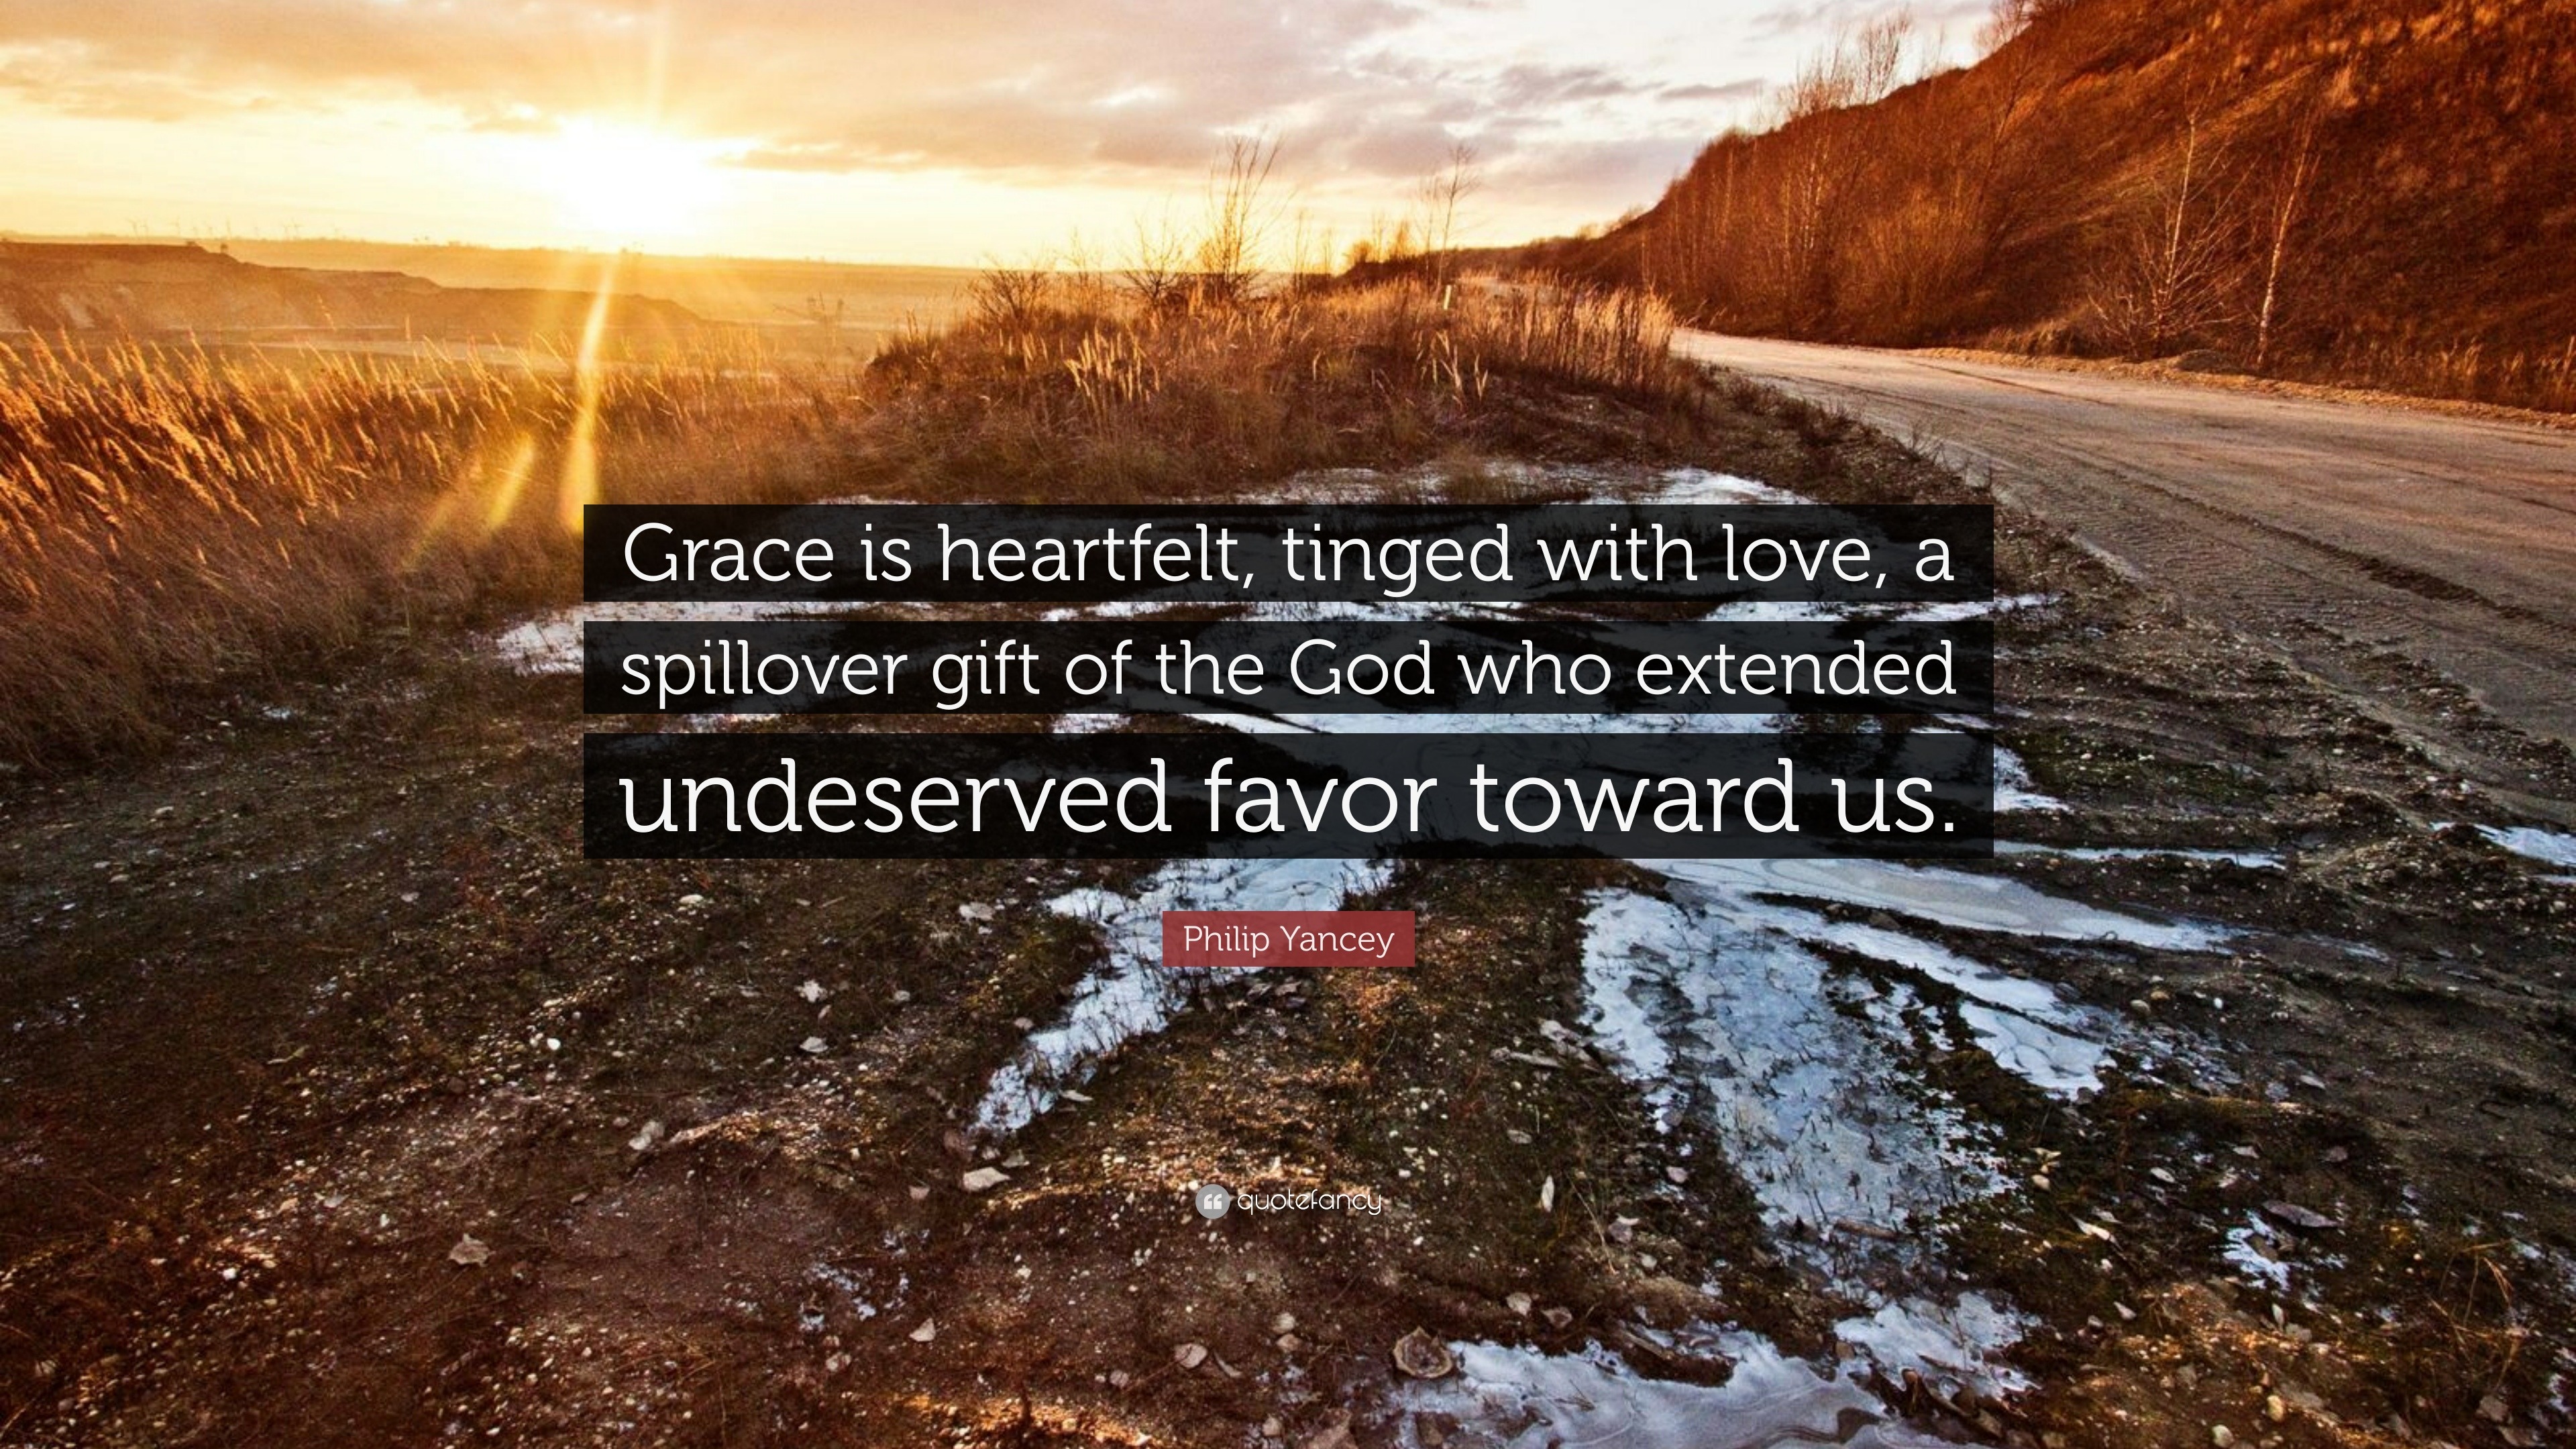 Philip Yancey Quote Grace Is Heartfelt Tinged With Love A Spillover Gift Of The God Who